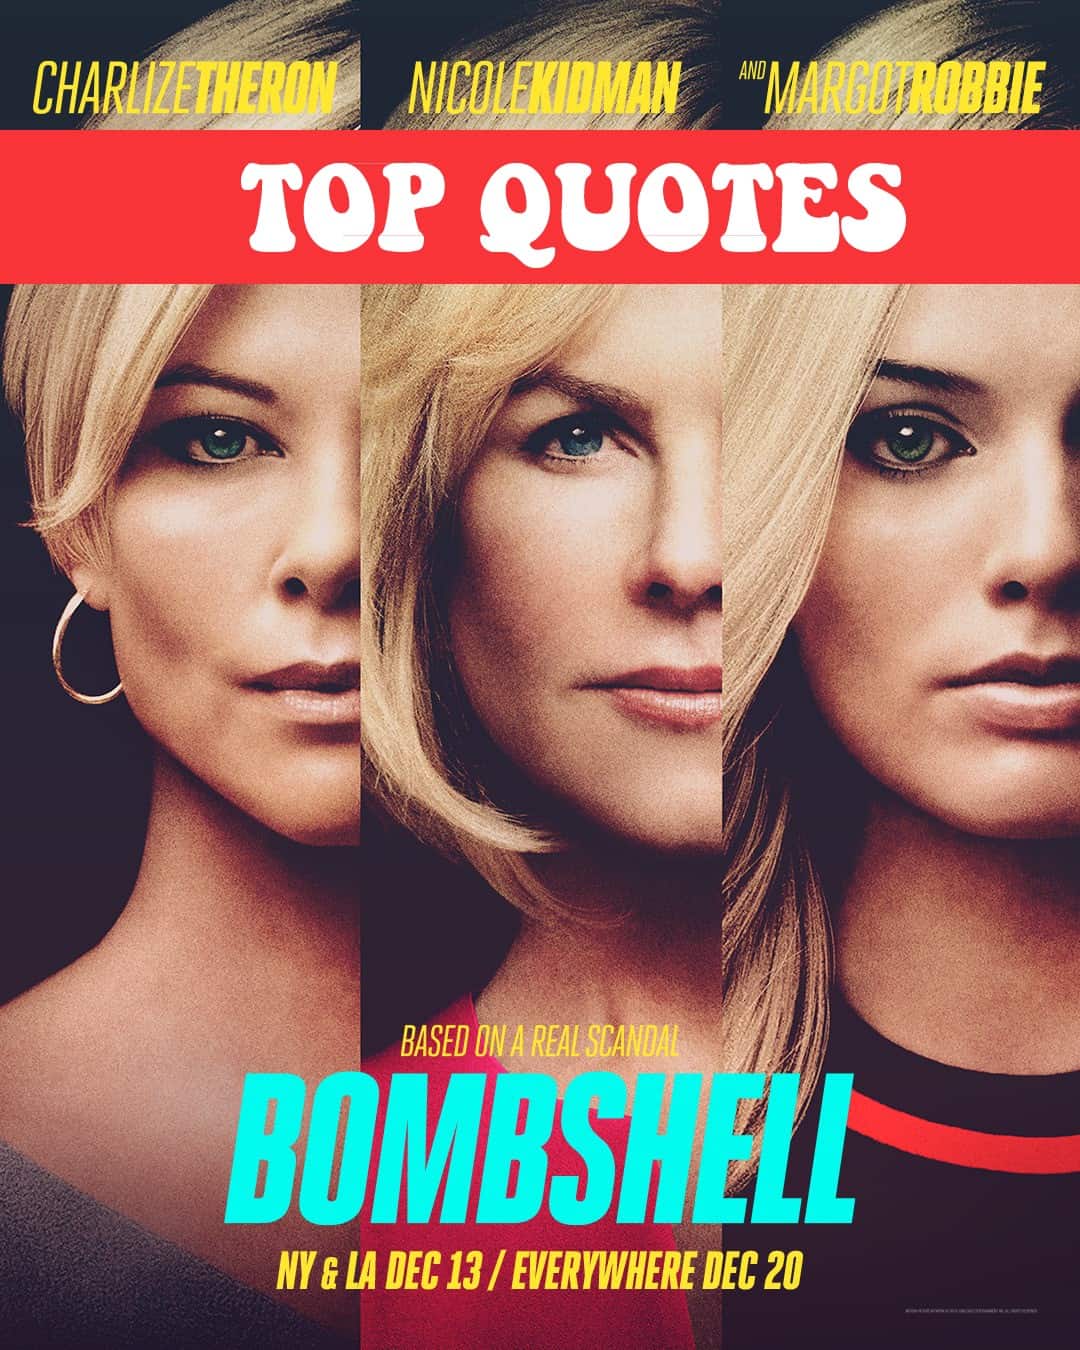 Bombshell Quotes - Top lines from the movie! - Enza's Bargains1080 x 1350